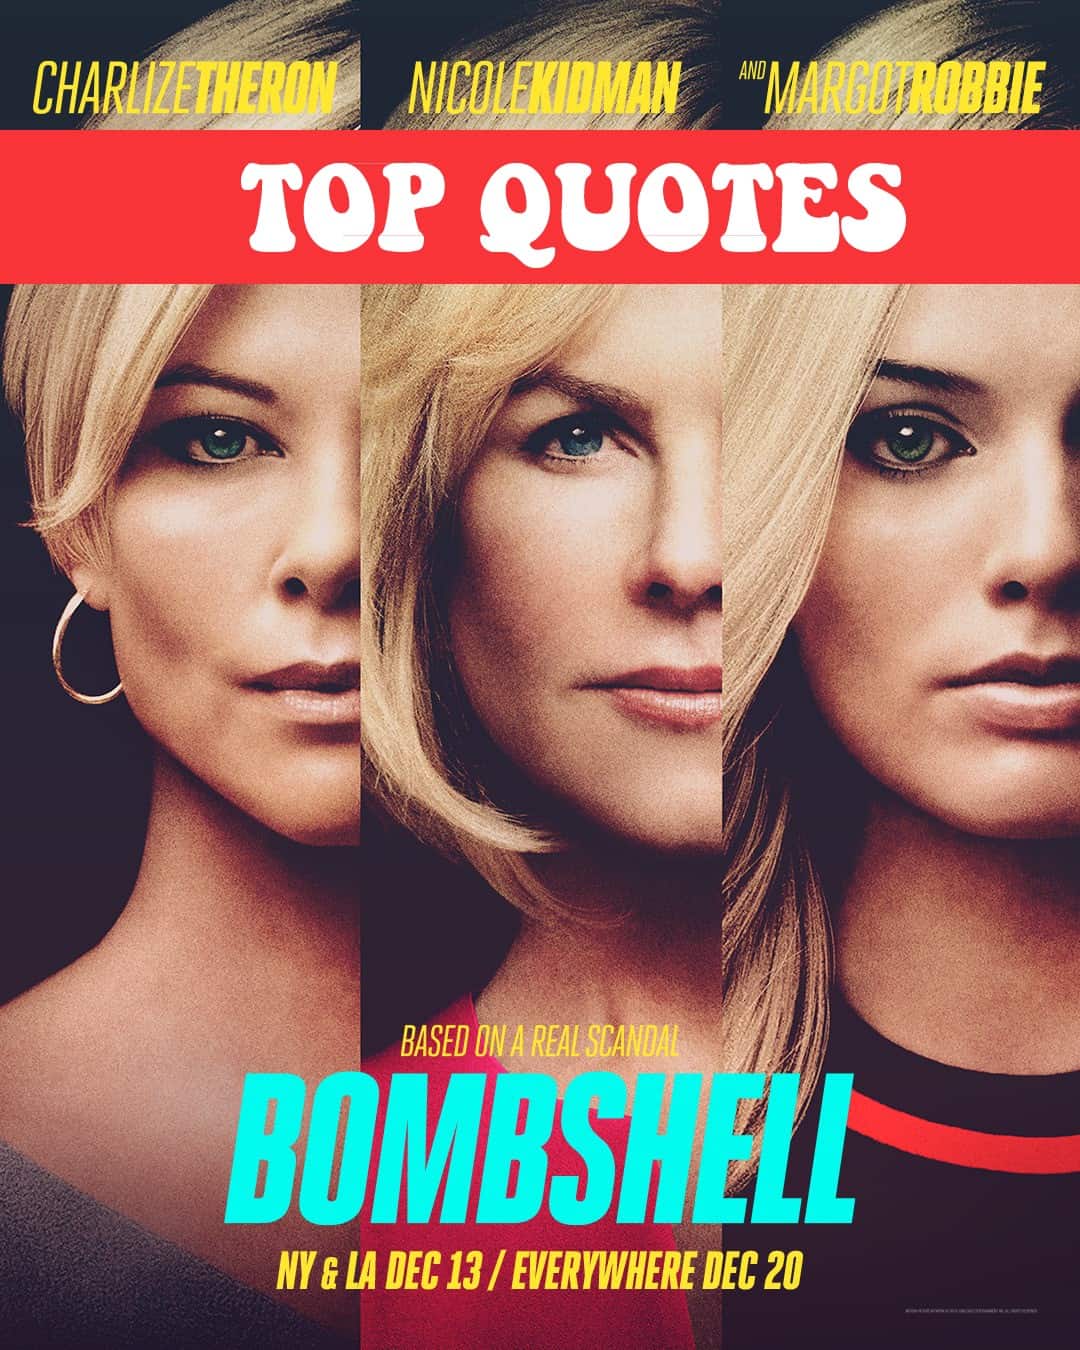 Bombshell Quotes - Top lines from the movie! - Enza's Bargains1080 x 1350